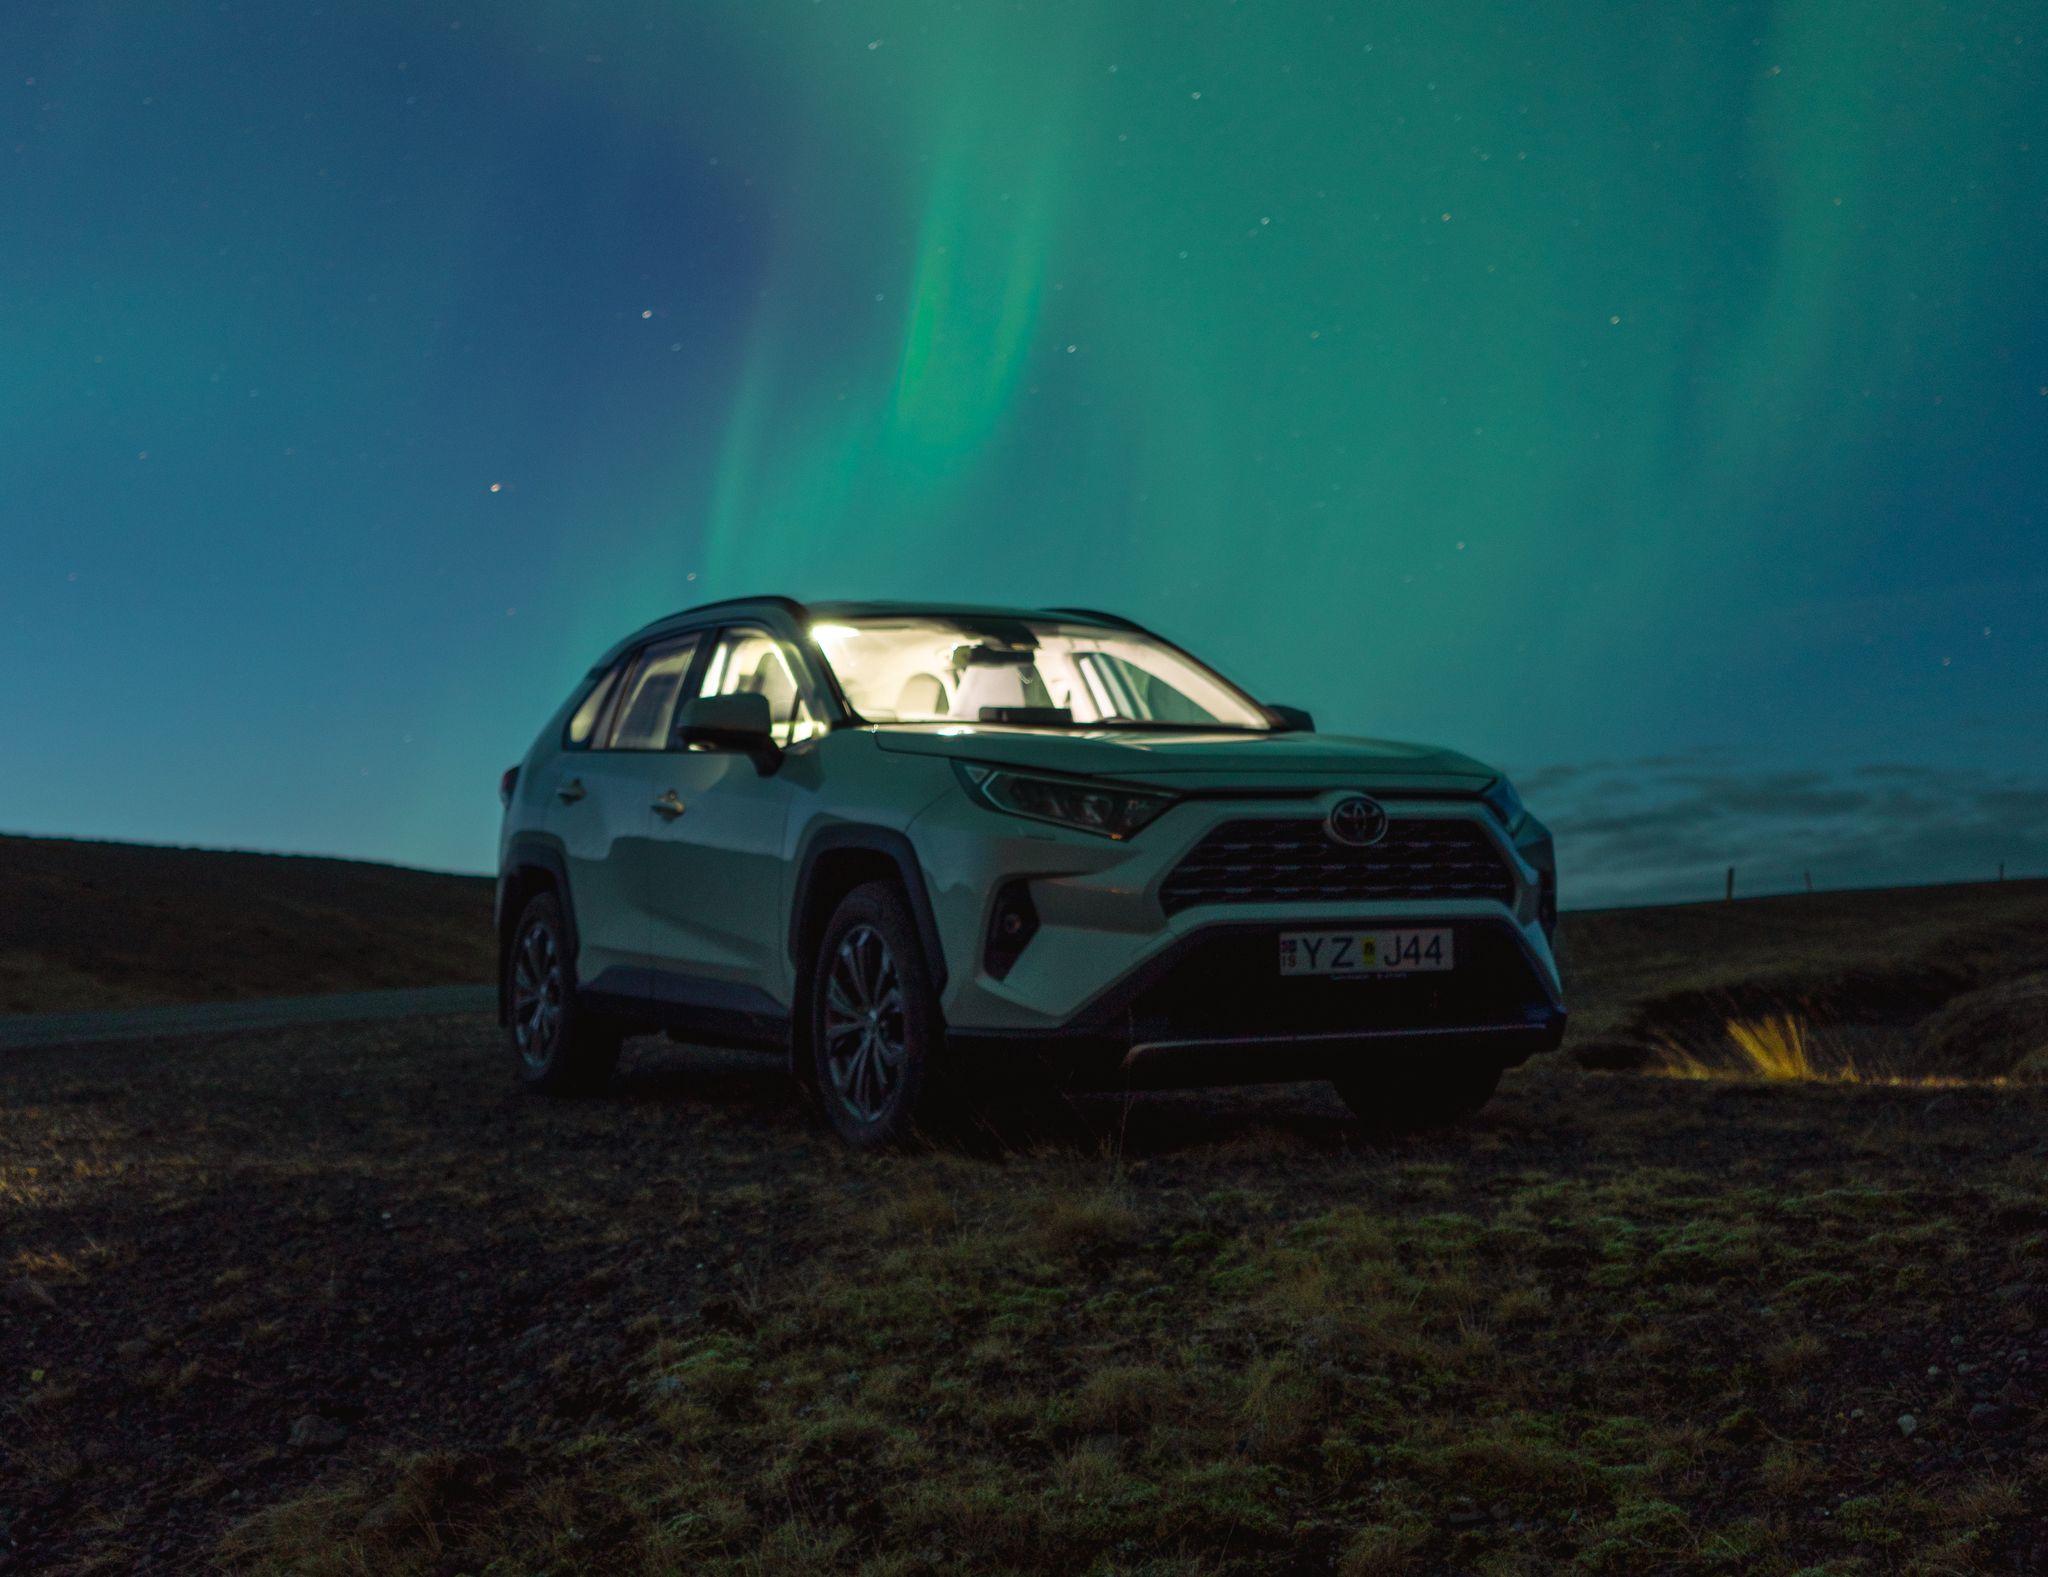 A Toyota Rav4 rental car under the mesmerizing display of the Northern Lights in Iceland